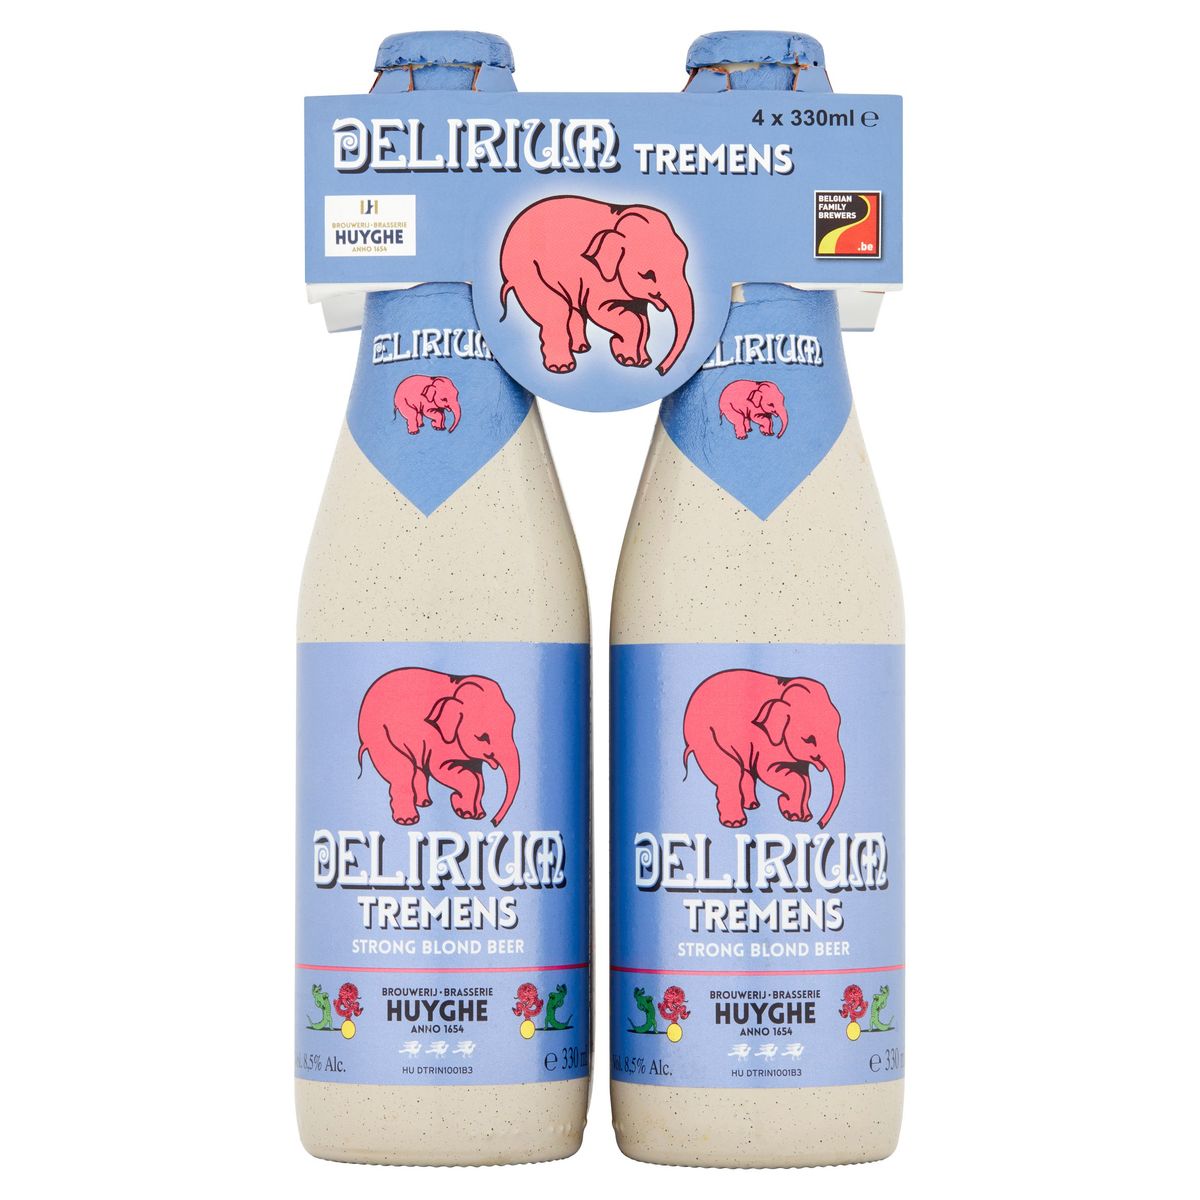 Delirium Tremens Strong Blond Beer Bouteilles 4 x 330 ml